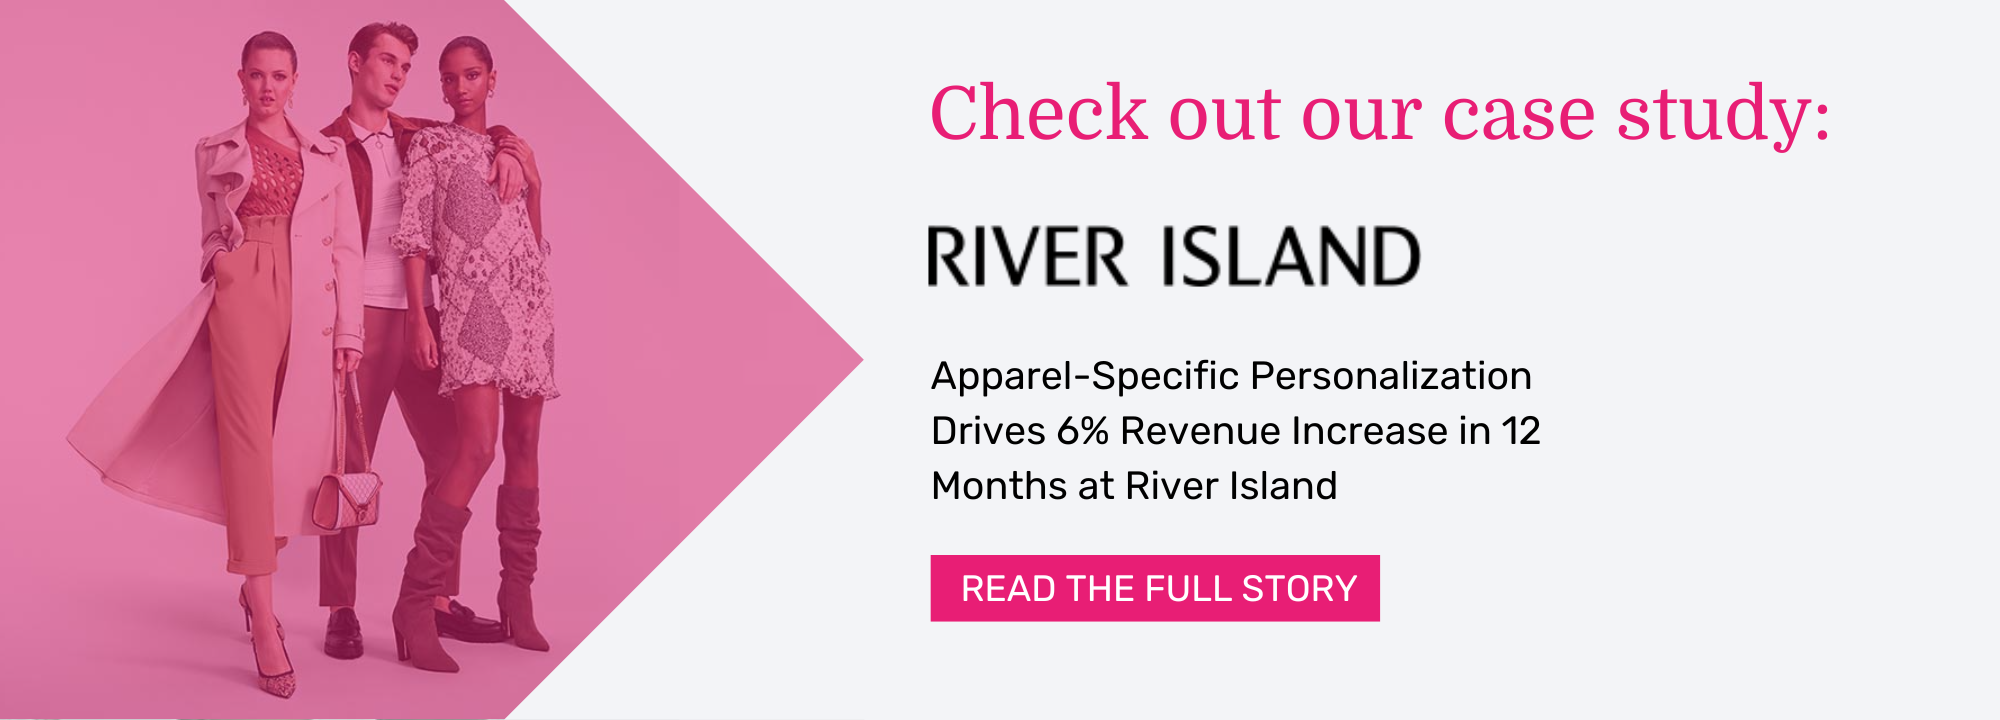 River Island increased their revenue by 6% in 12 months